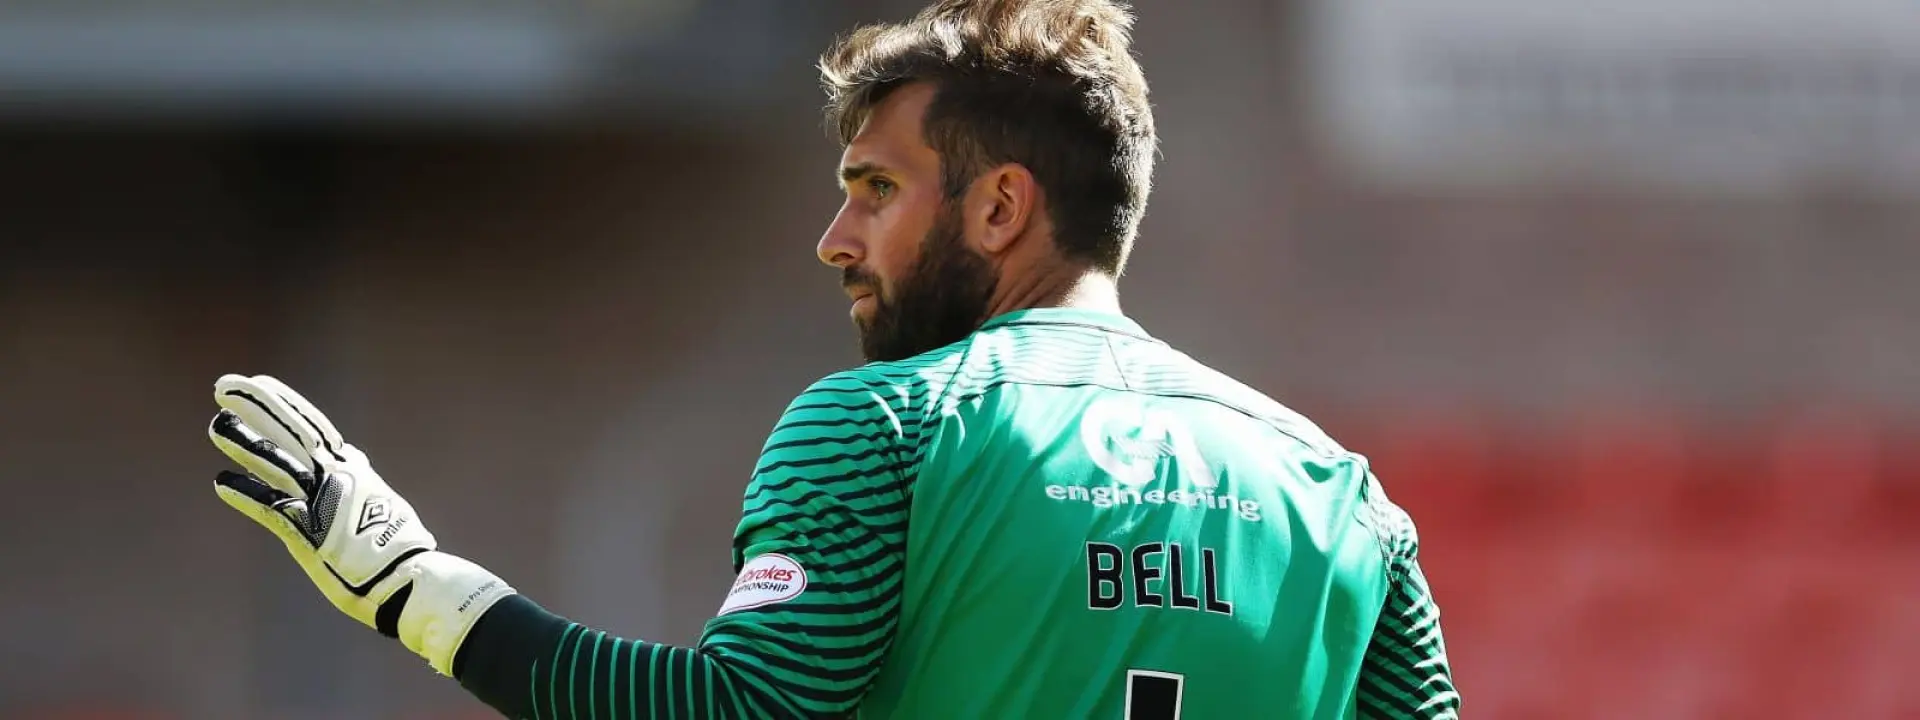 Cammy Bell - Dundee United